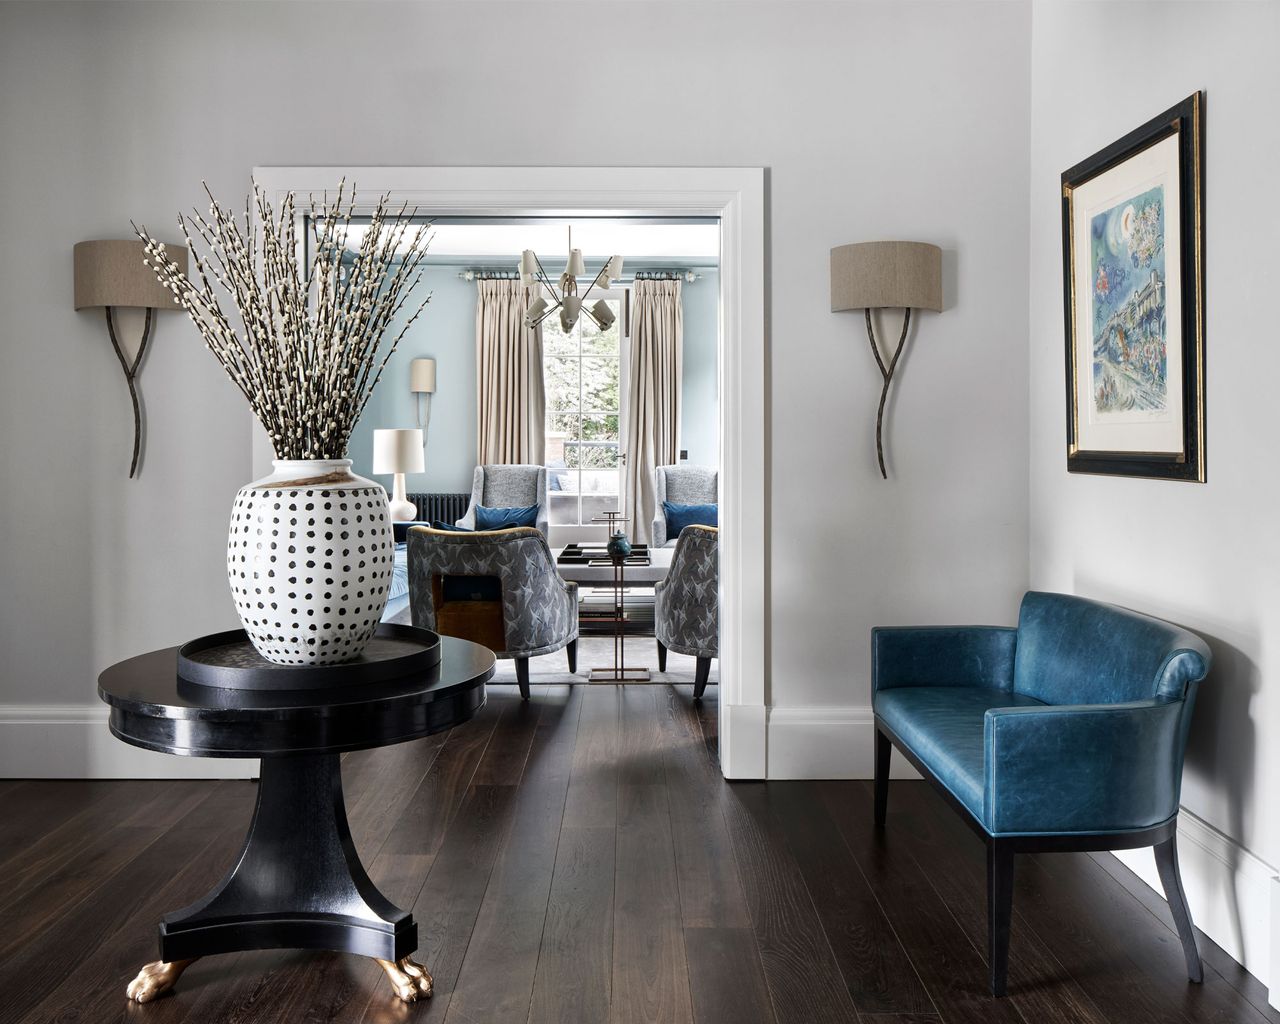 Hallway paint ideas the 15 best colors to use